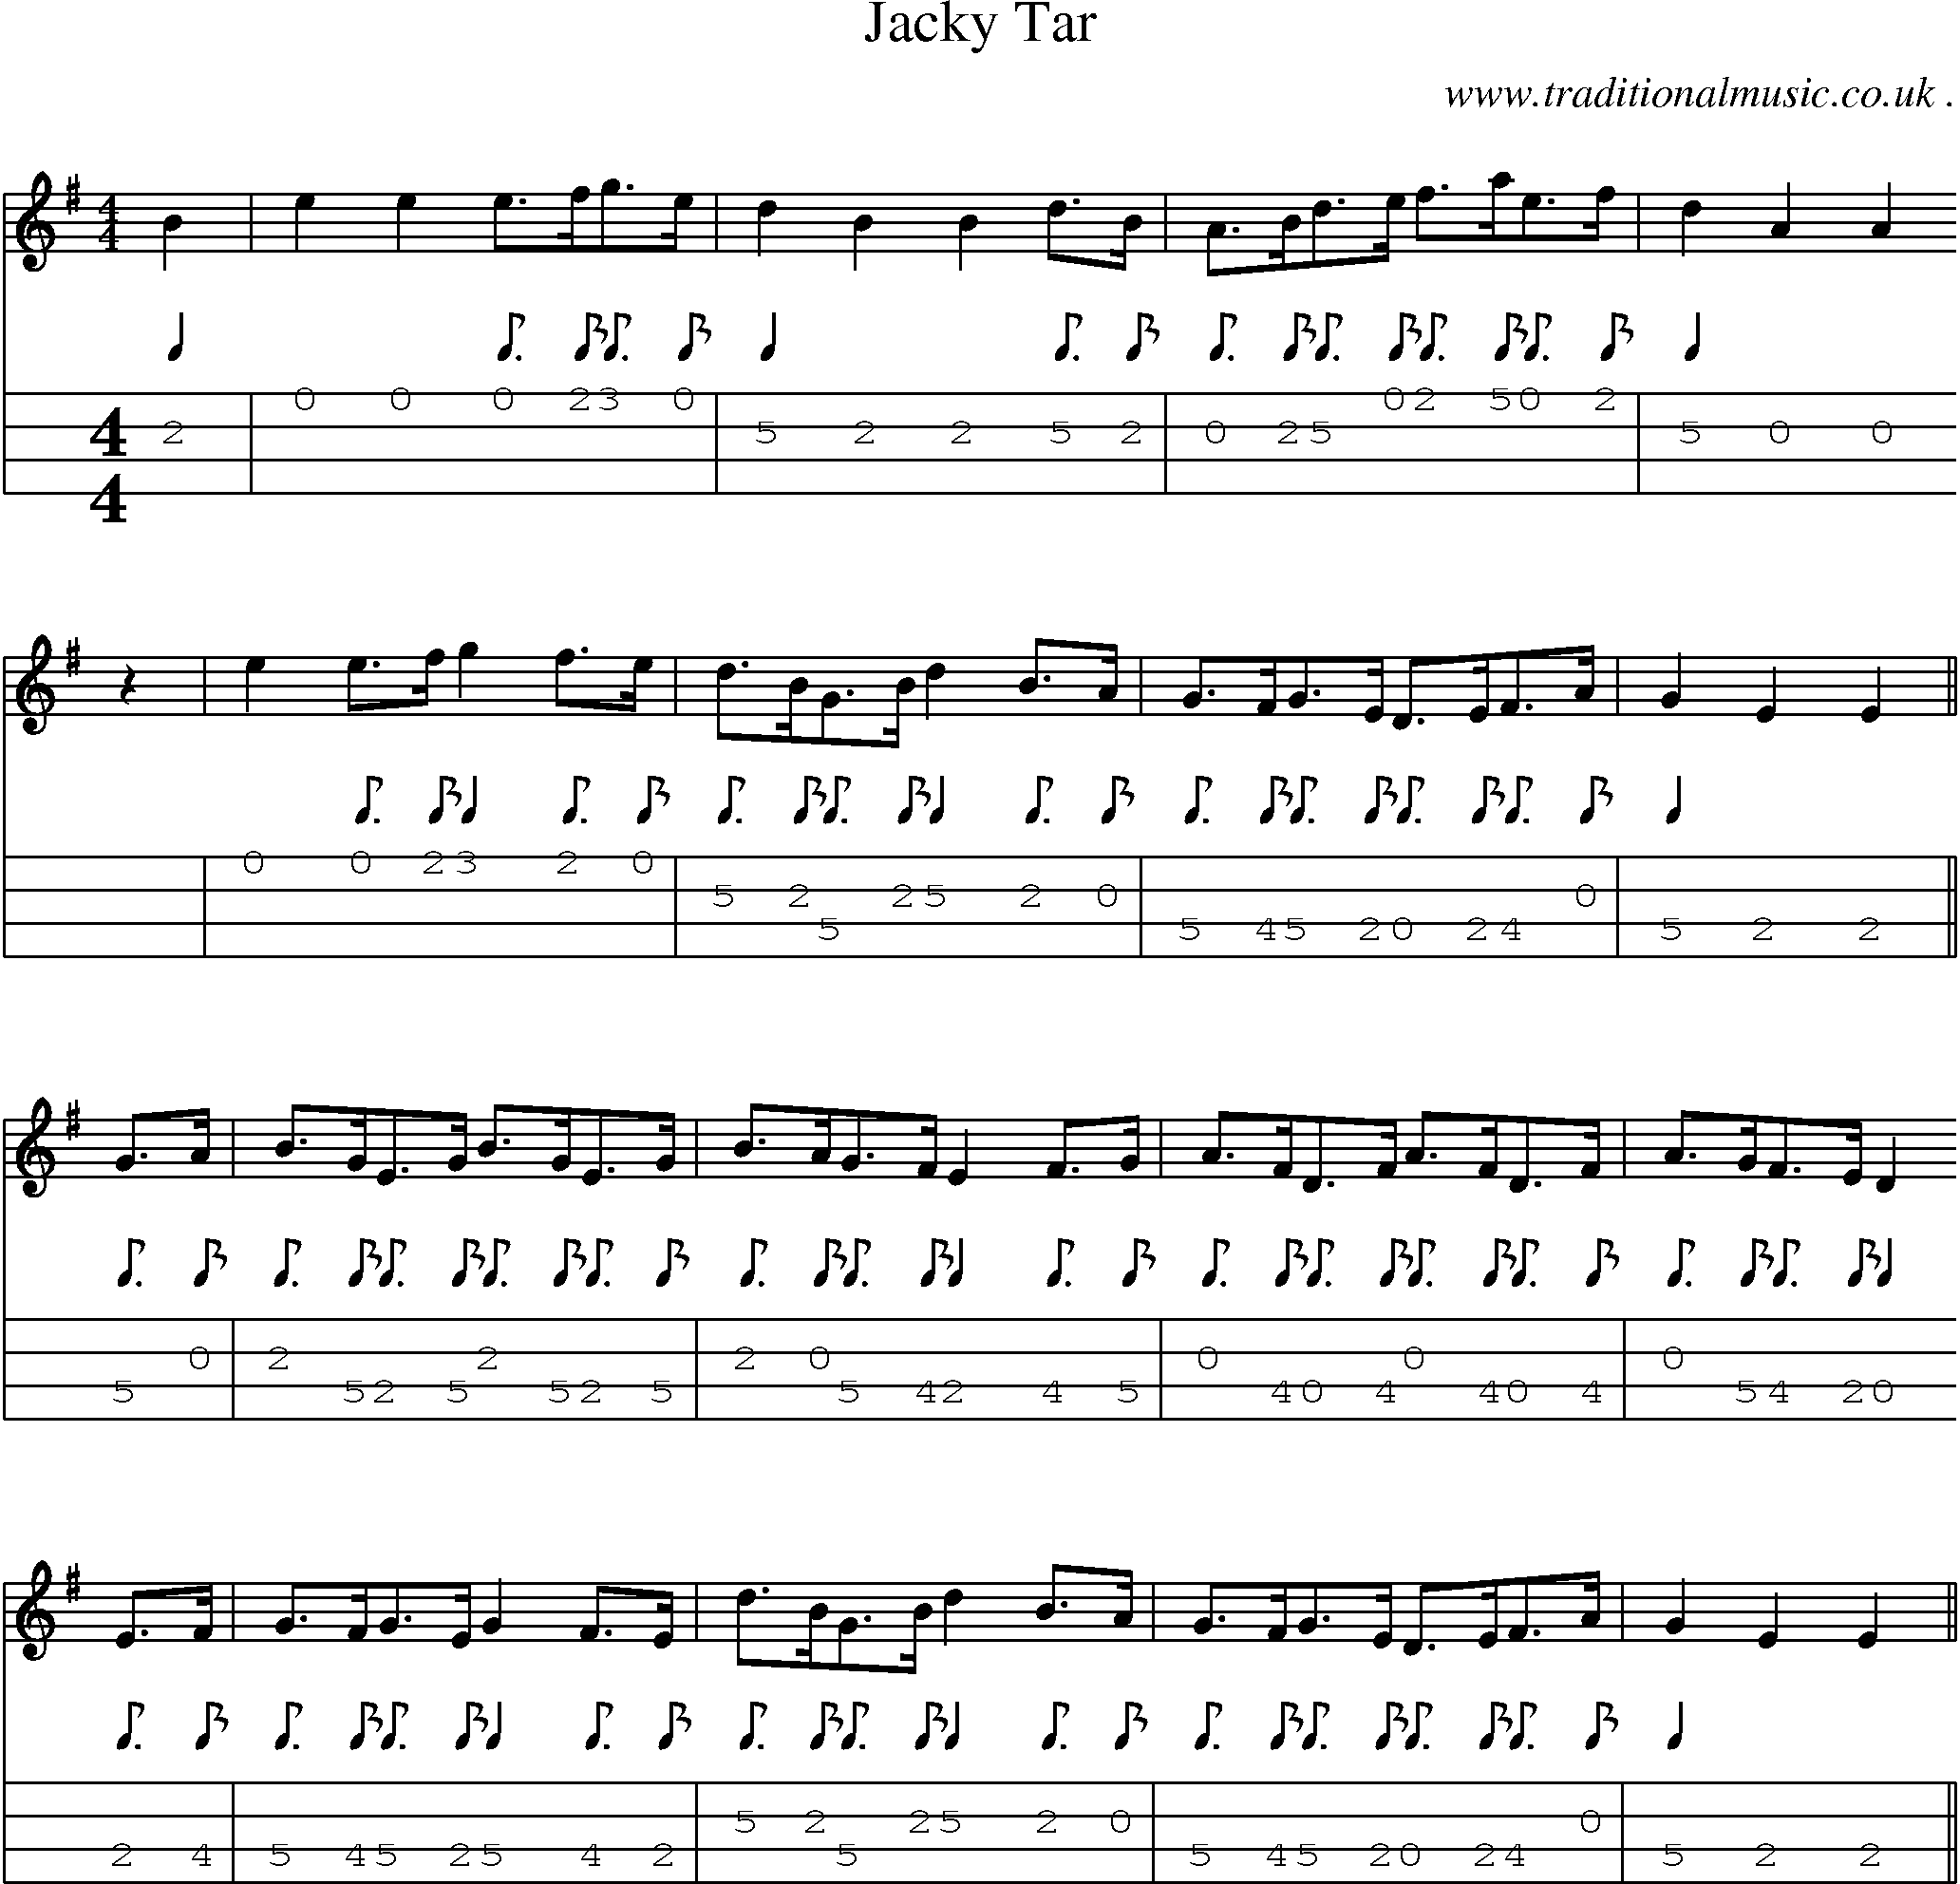 Sheet-music  score, Chords and Mandolin Tabs for Jacky Tar